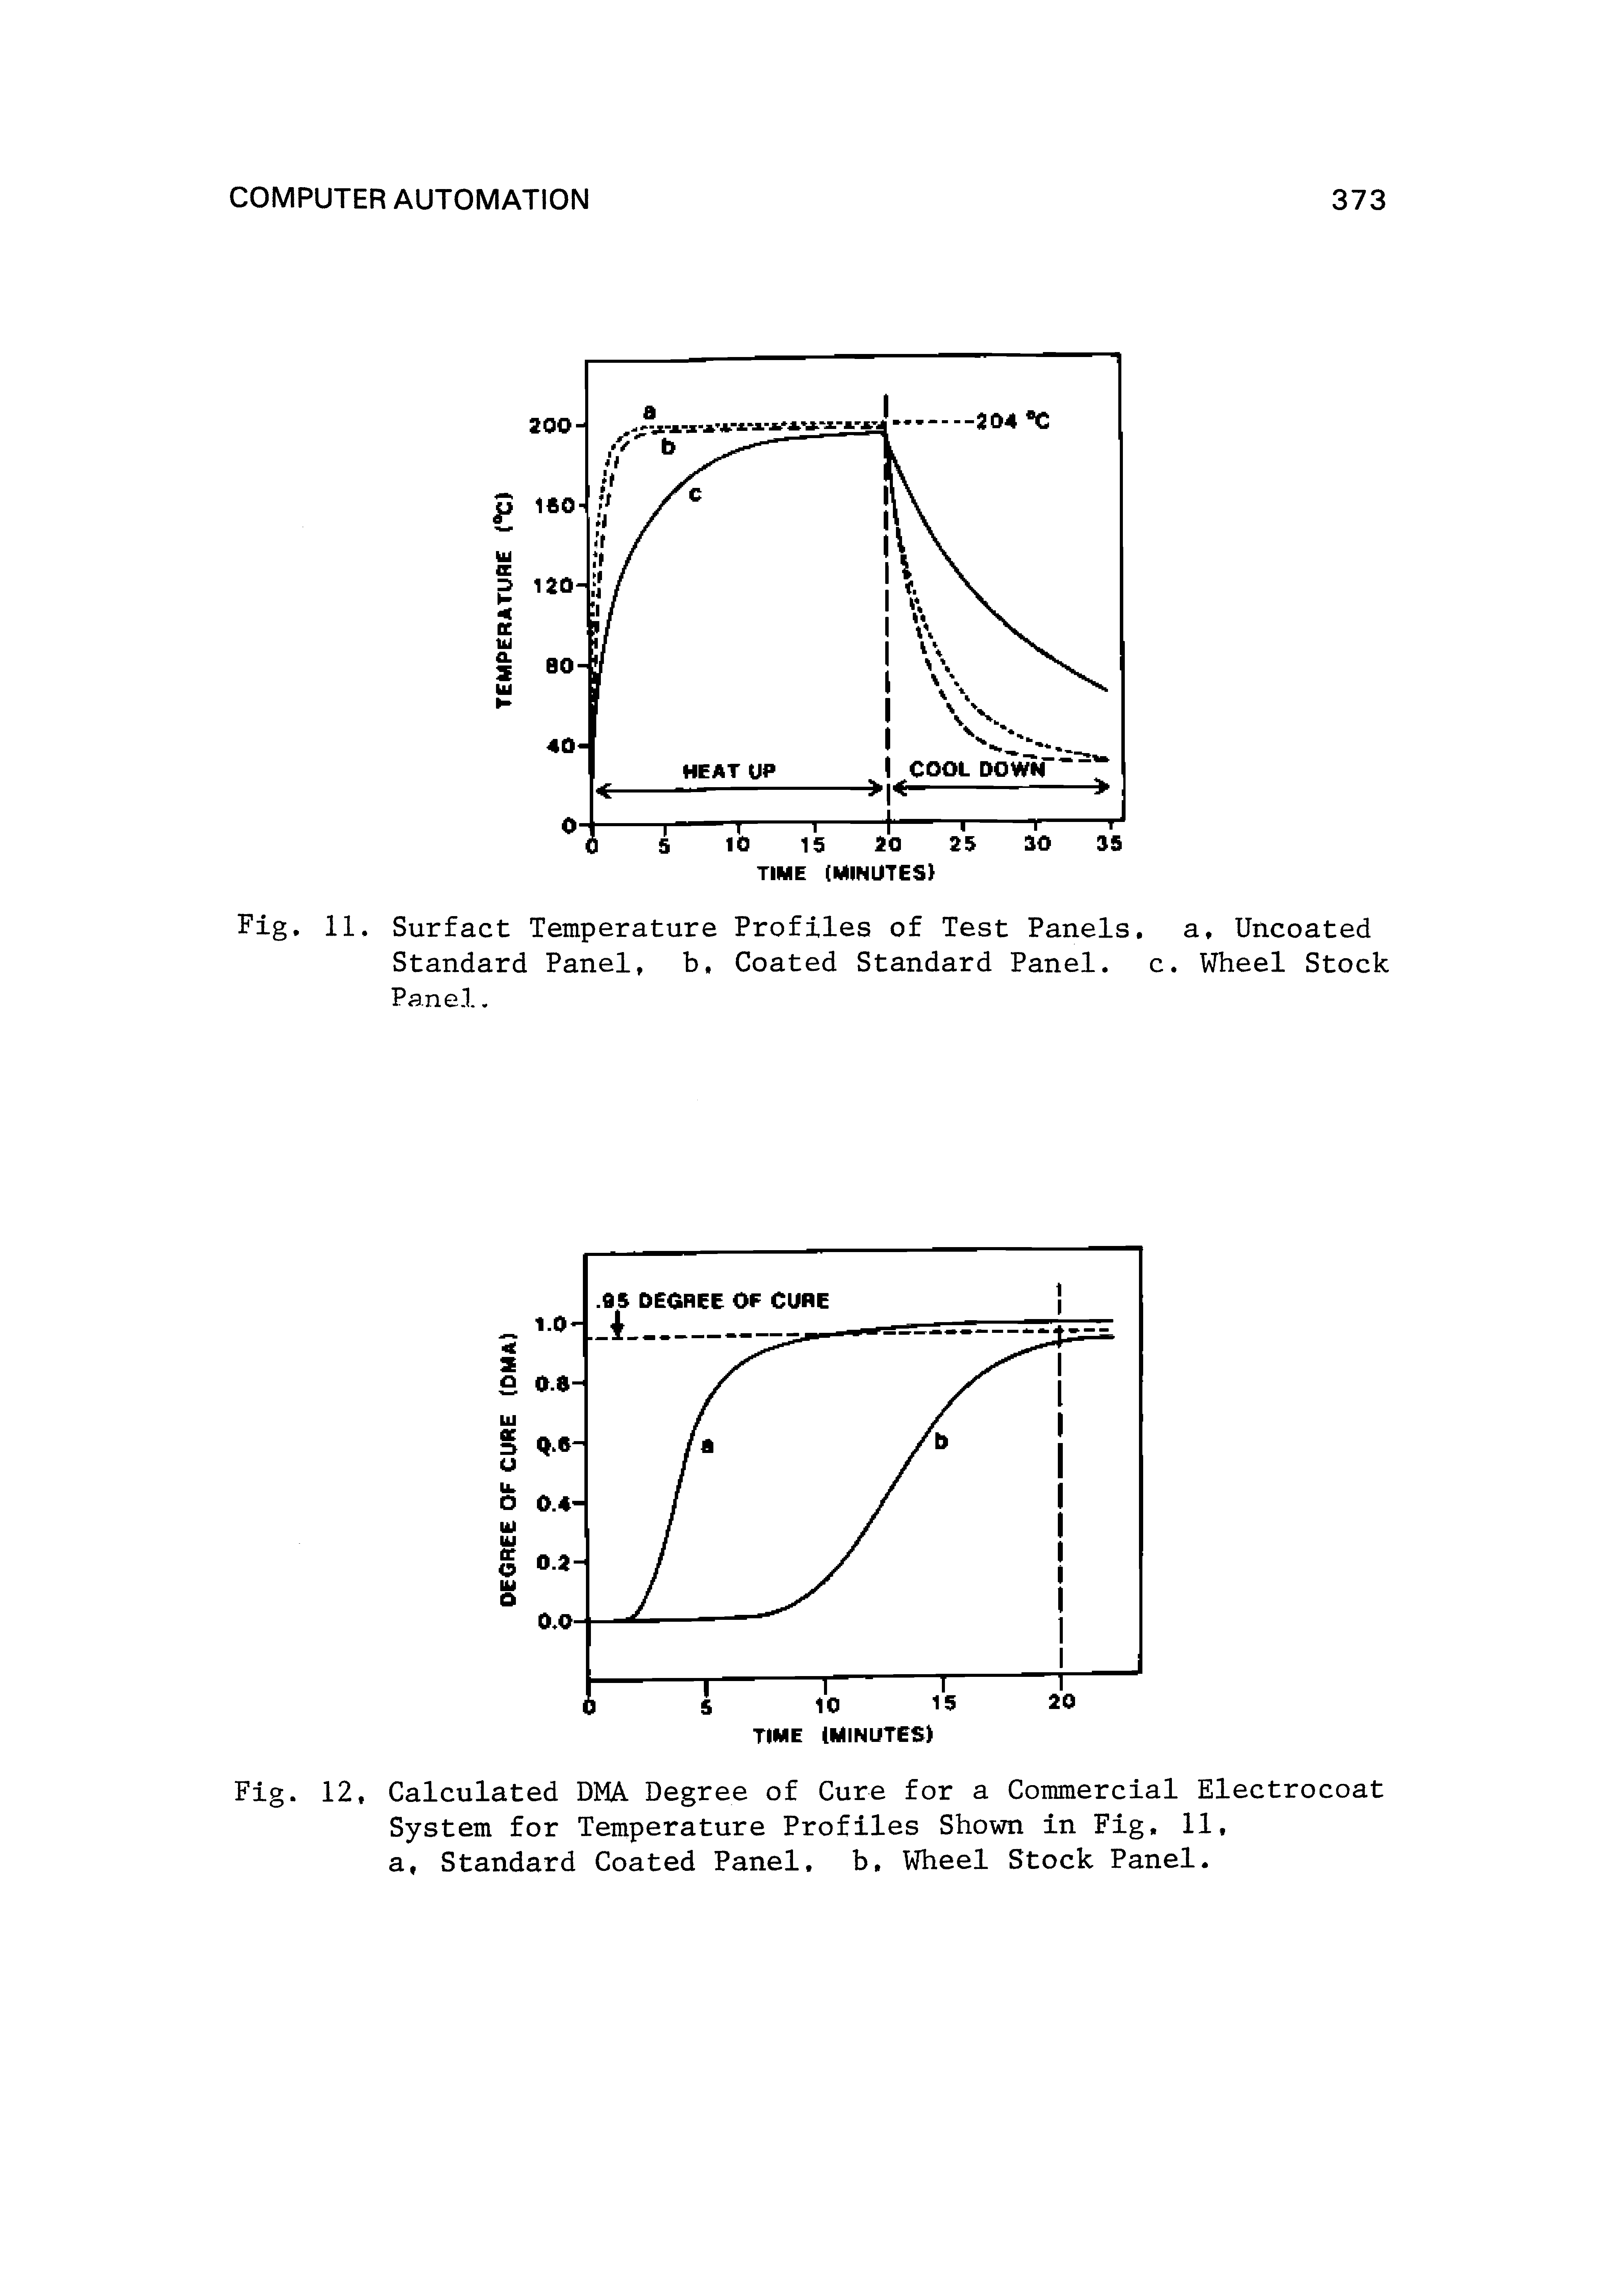 Fig. 12, Calculated DMA. Degree of Cure for a Commercial Electrocoat System for Temperature Profiles Shown in Fig, 11, a, Standard Coated Panel, b. Wheel Stock Panel.